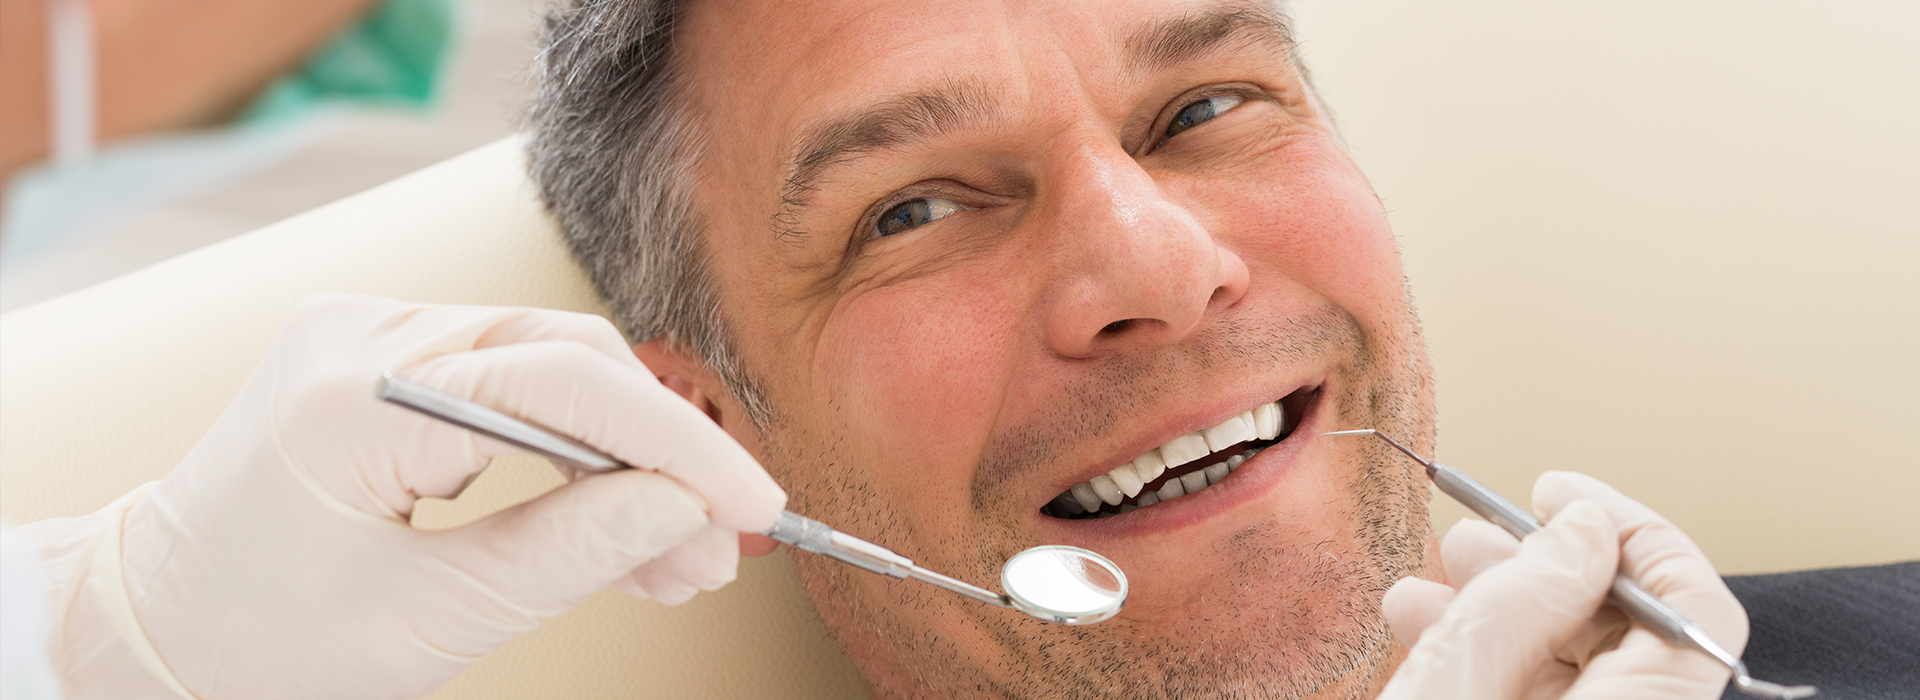 Village Dental | Periodontal Treatment, Teeth Whitening and Cosmetic Dentistry